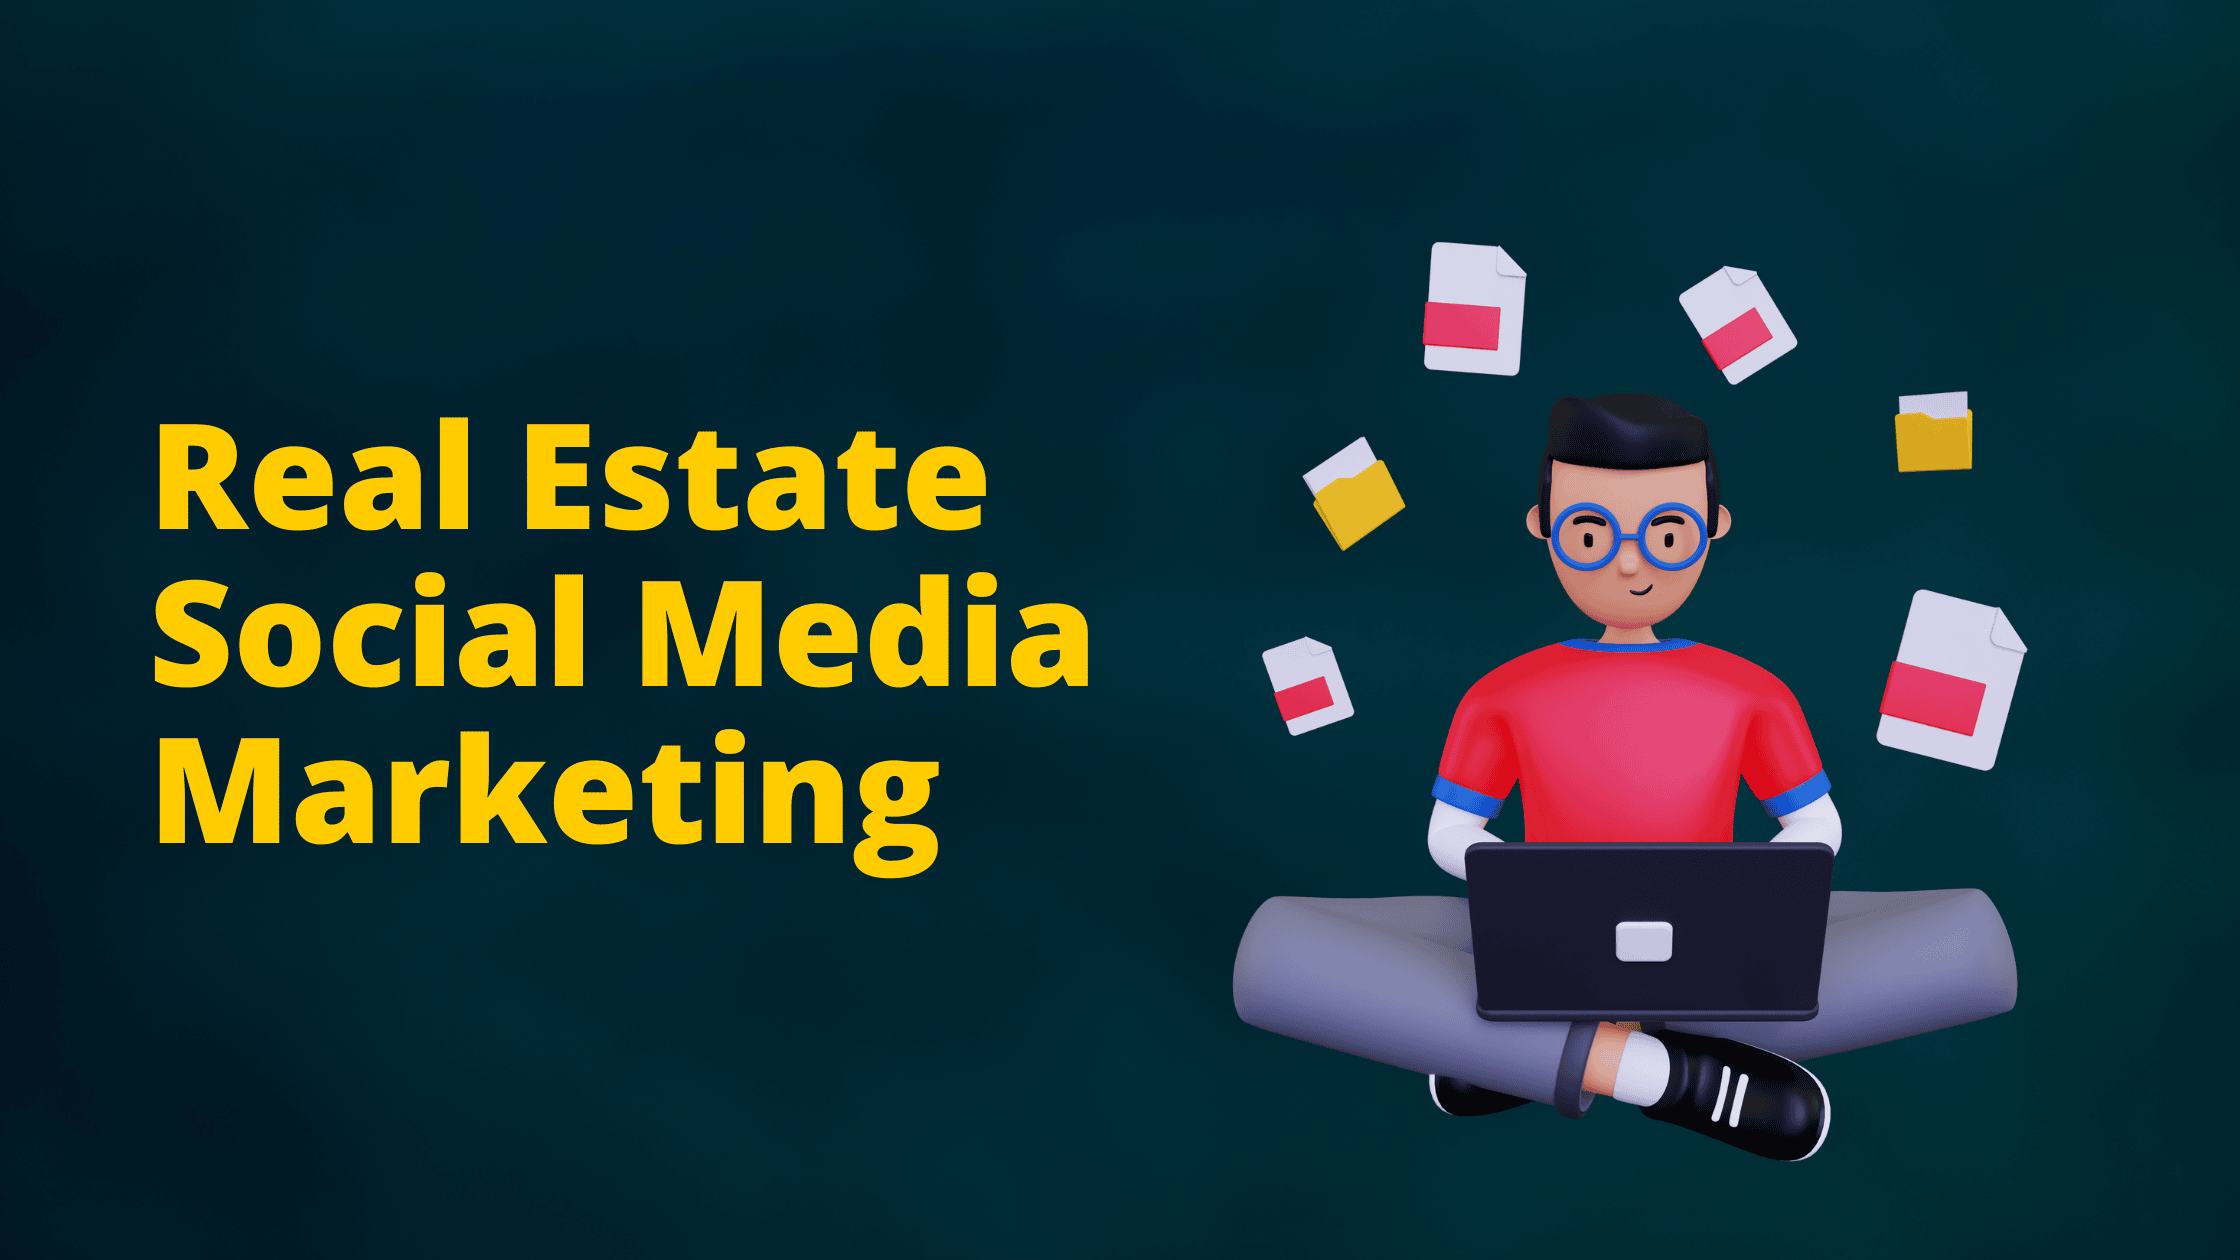 The Guide to Real Estate Social Media Marketing